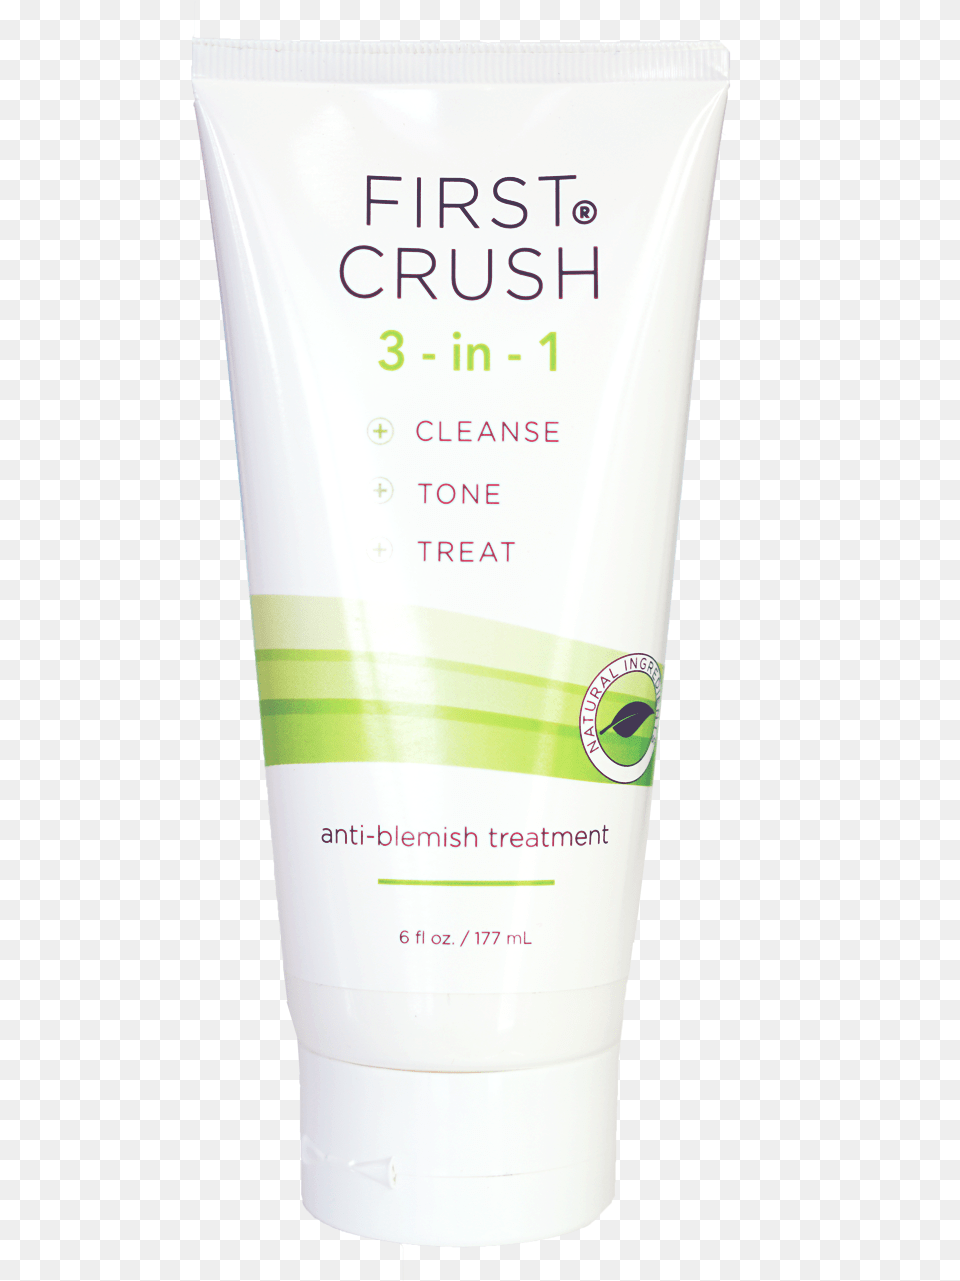 First Crush 3 In 1 Anti Blemish Treatment From Merlot, Bottle, Lotion, Cosmetics, Sunscreen Free Png